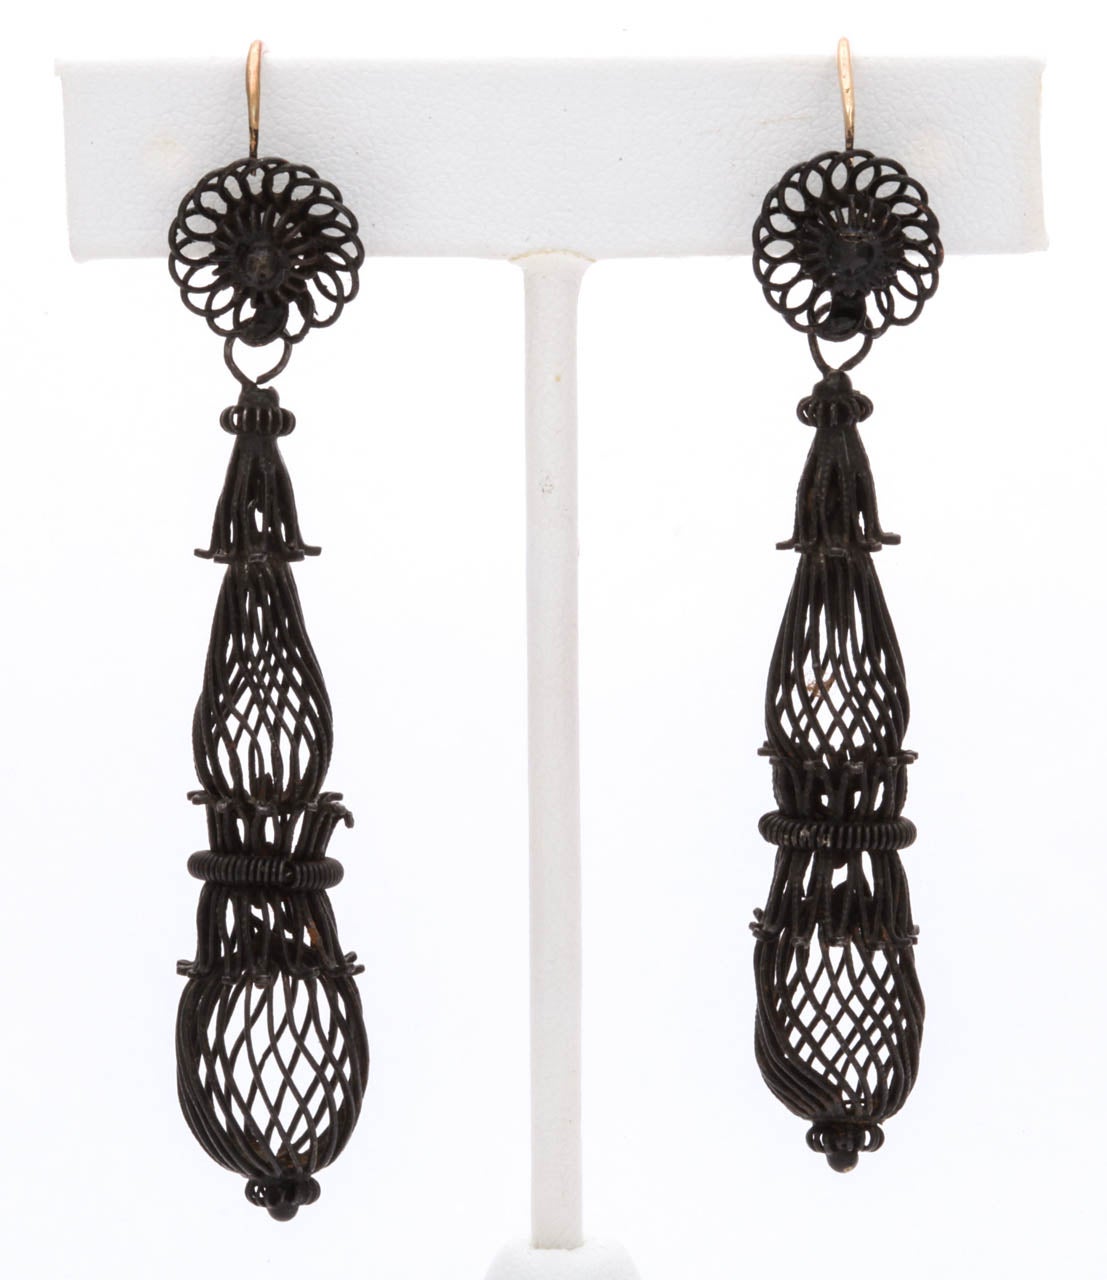 Glorious woven Berlin Iron earrings are light as air and a rare  treasure. Fine strands of iron criss cross forming elongated  cages topped with iron flowers. This is one of the most rare pair of earrings from this prized period. Germany went to the